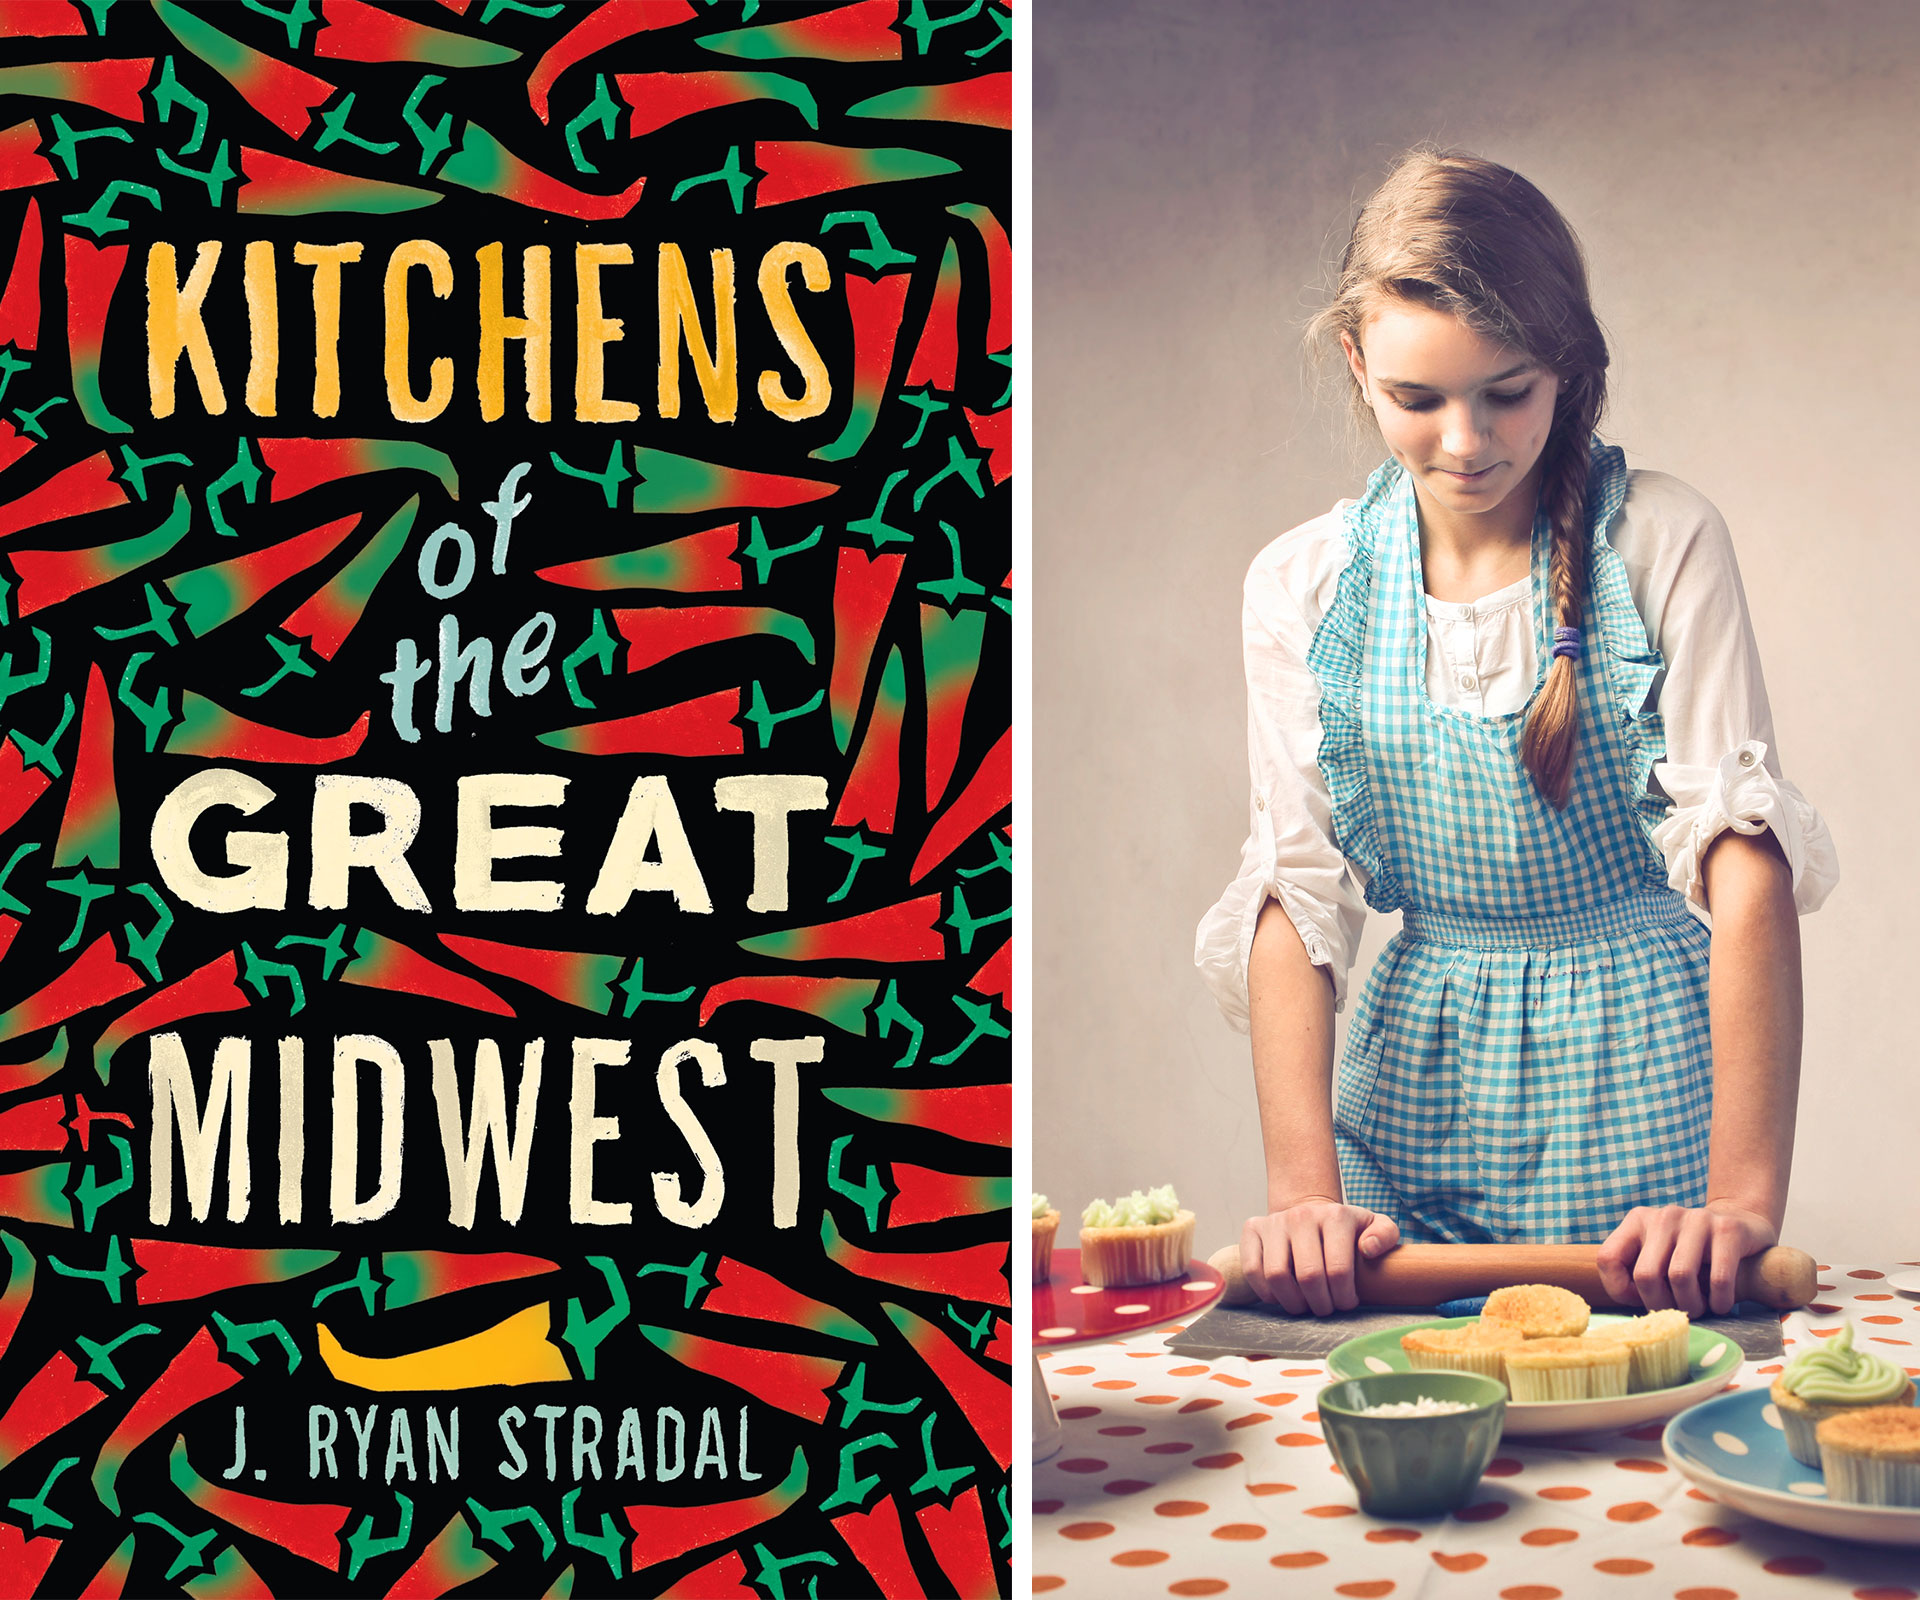 Kitchens of the Great Midwest by J Ryan Stradal